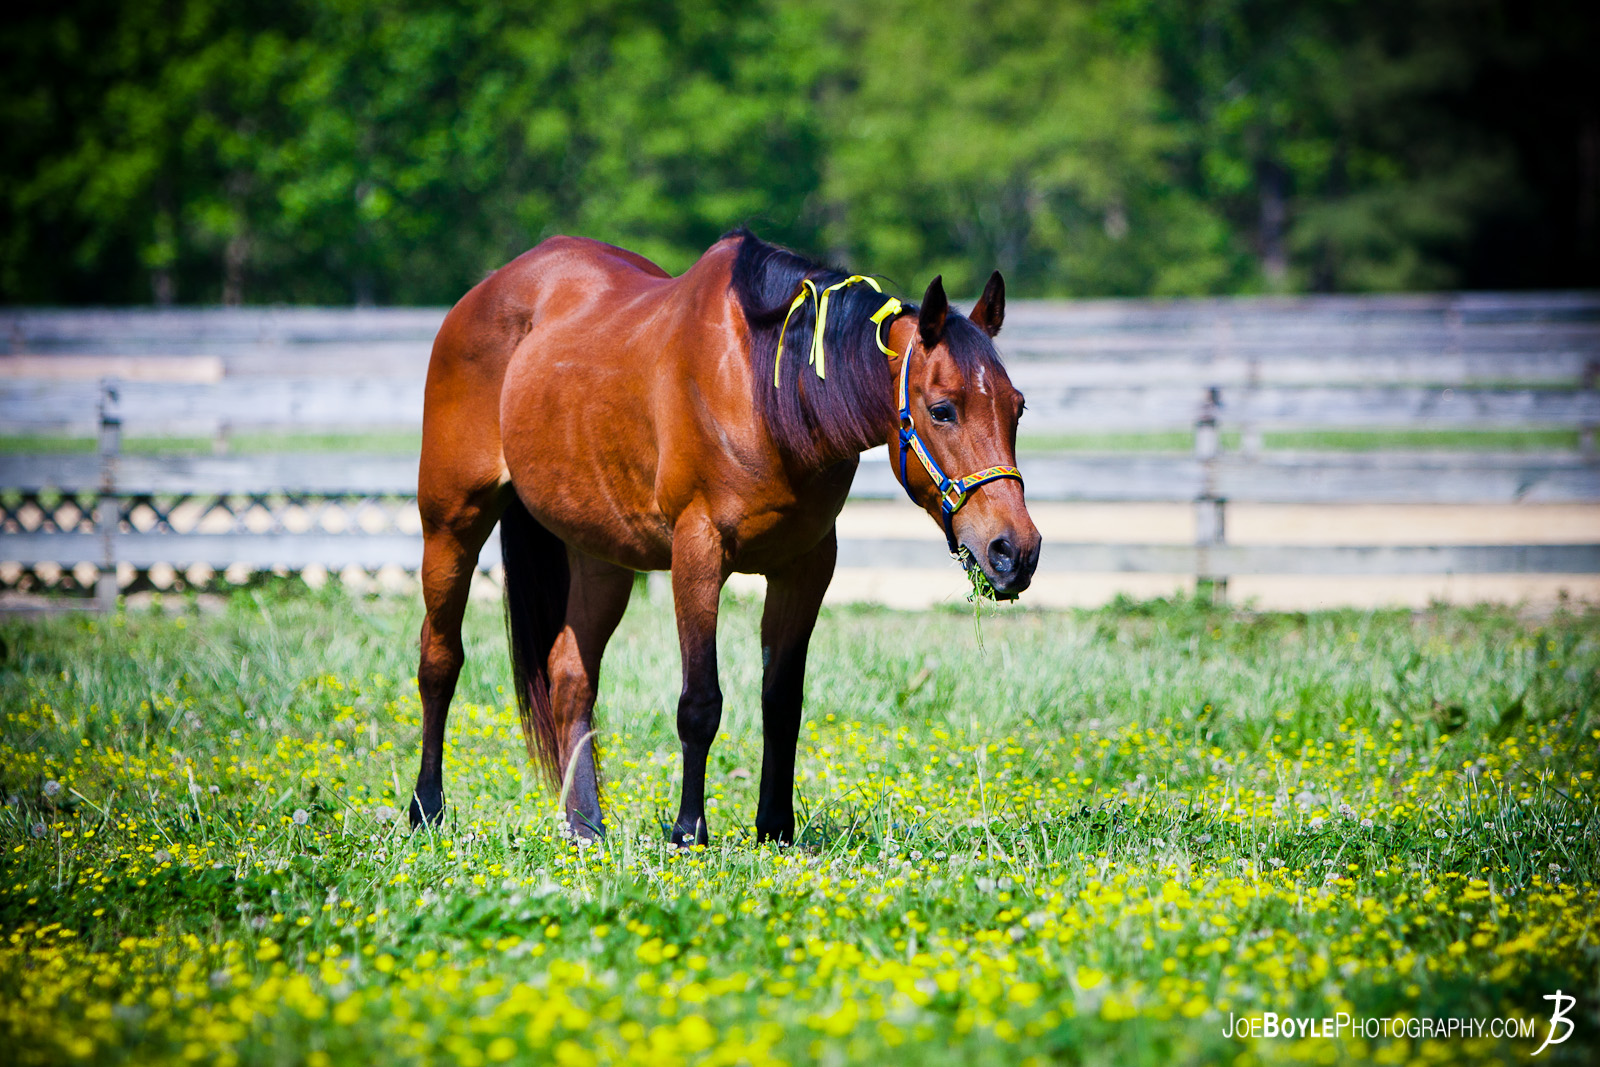   While at "Neigh Day" presented by Diamonds in the Rough Horses (Equine) Rescue Shelter, I was able to capture a photo of this horse grazing in the field. 